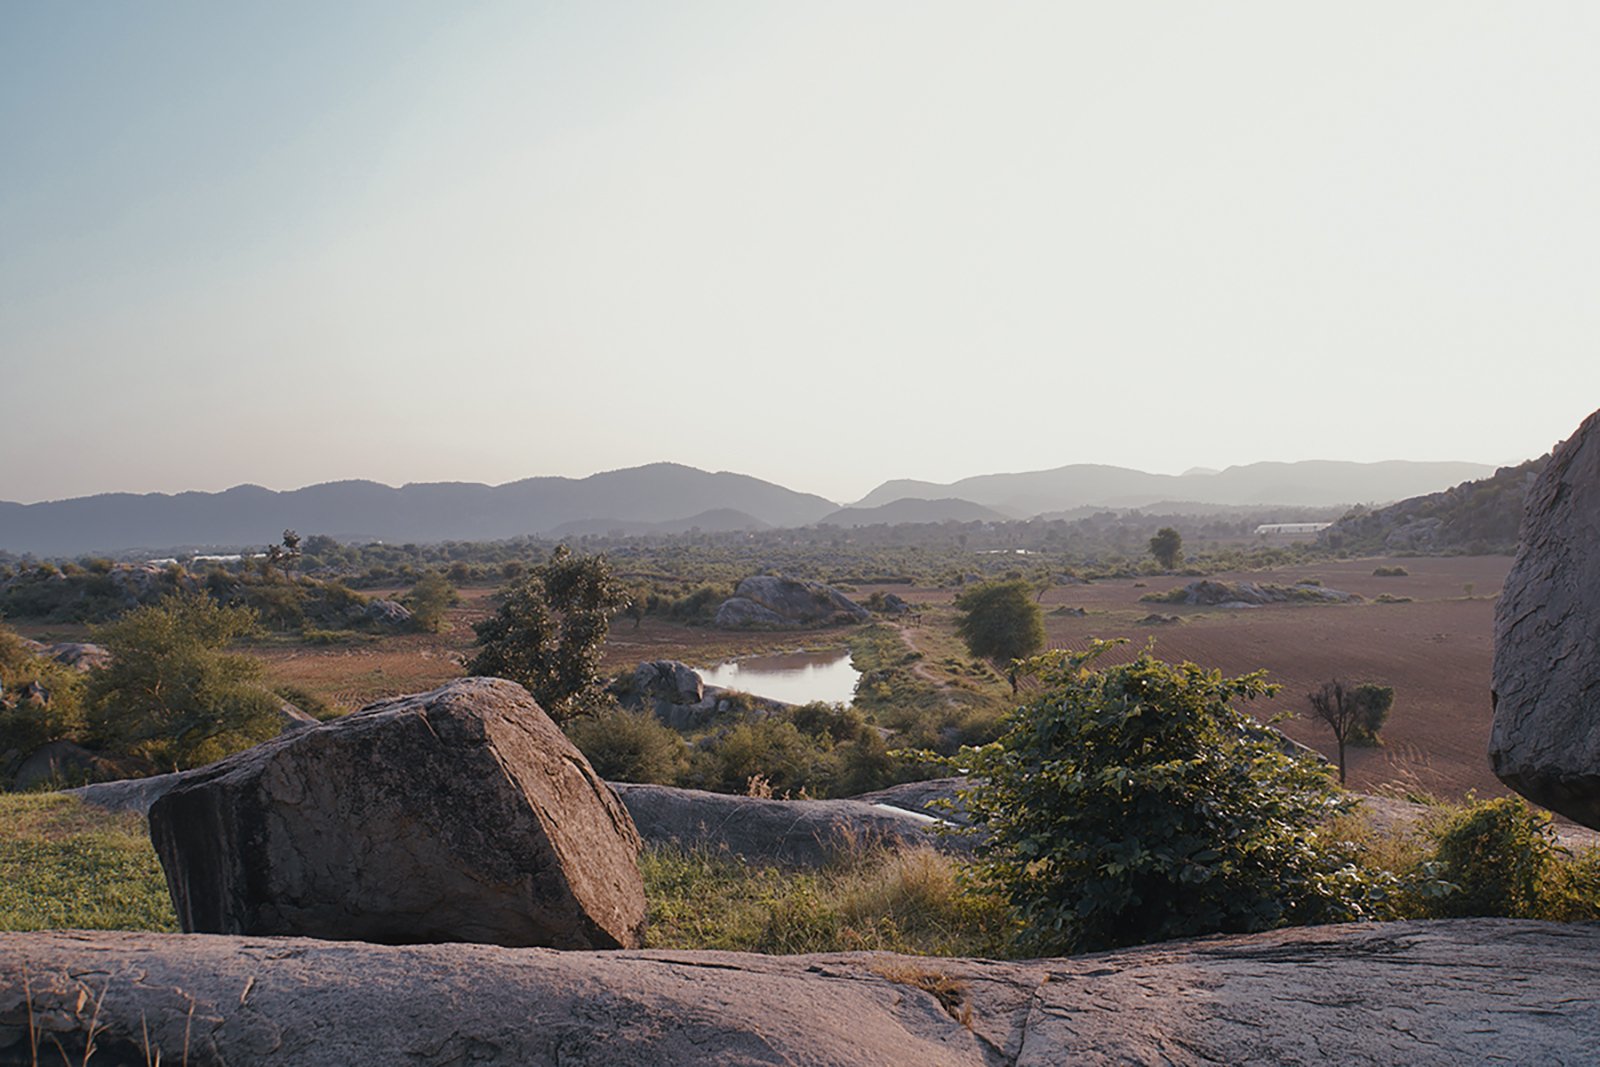 Landscape, surrounded by the green hills of the Aravalli mountains